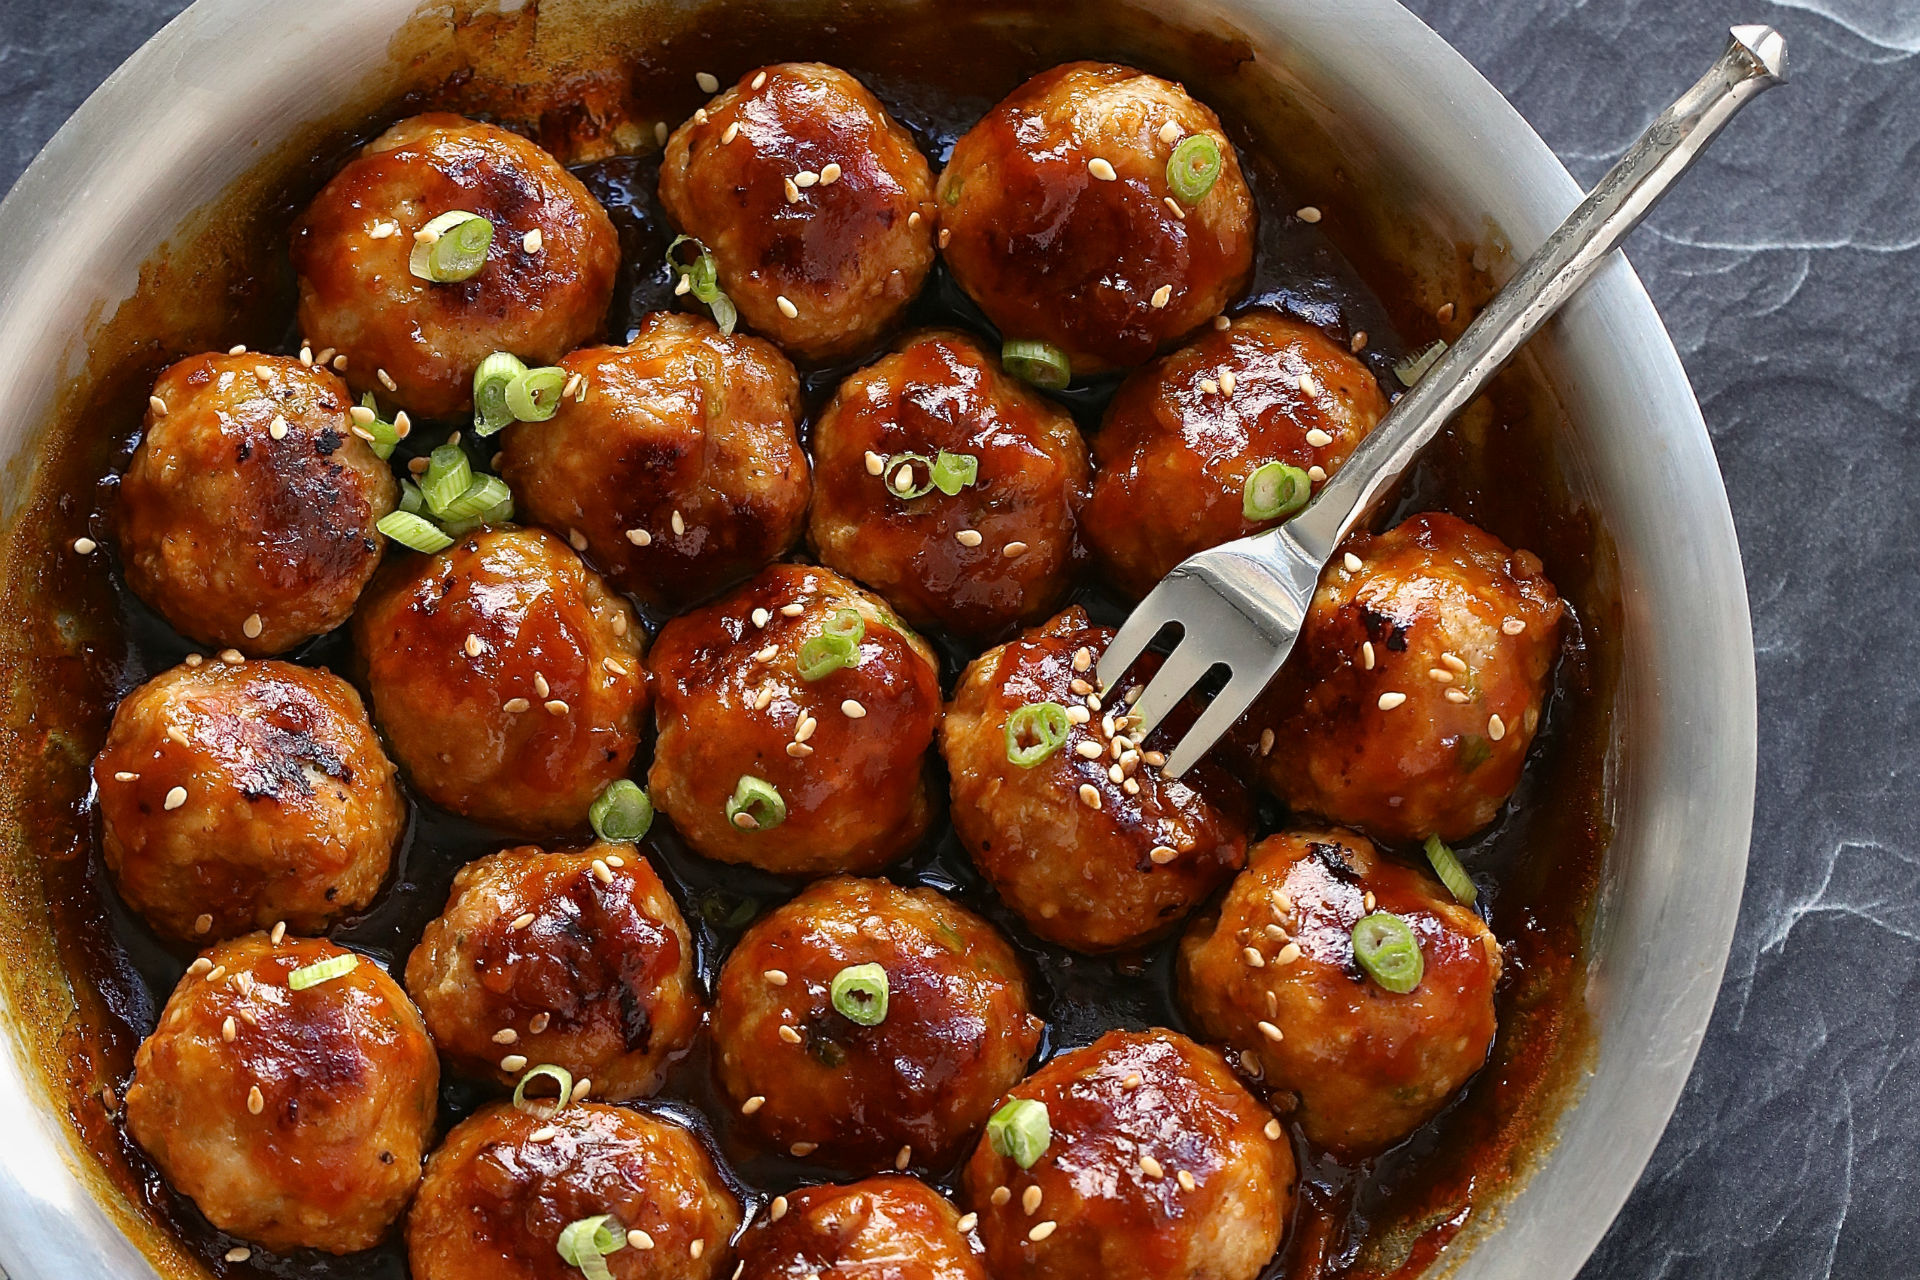 meatballs in a tangy glaze